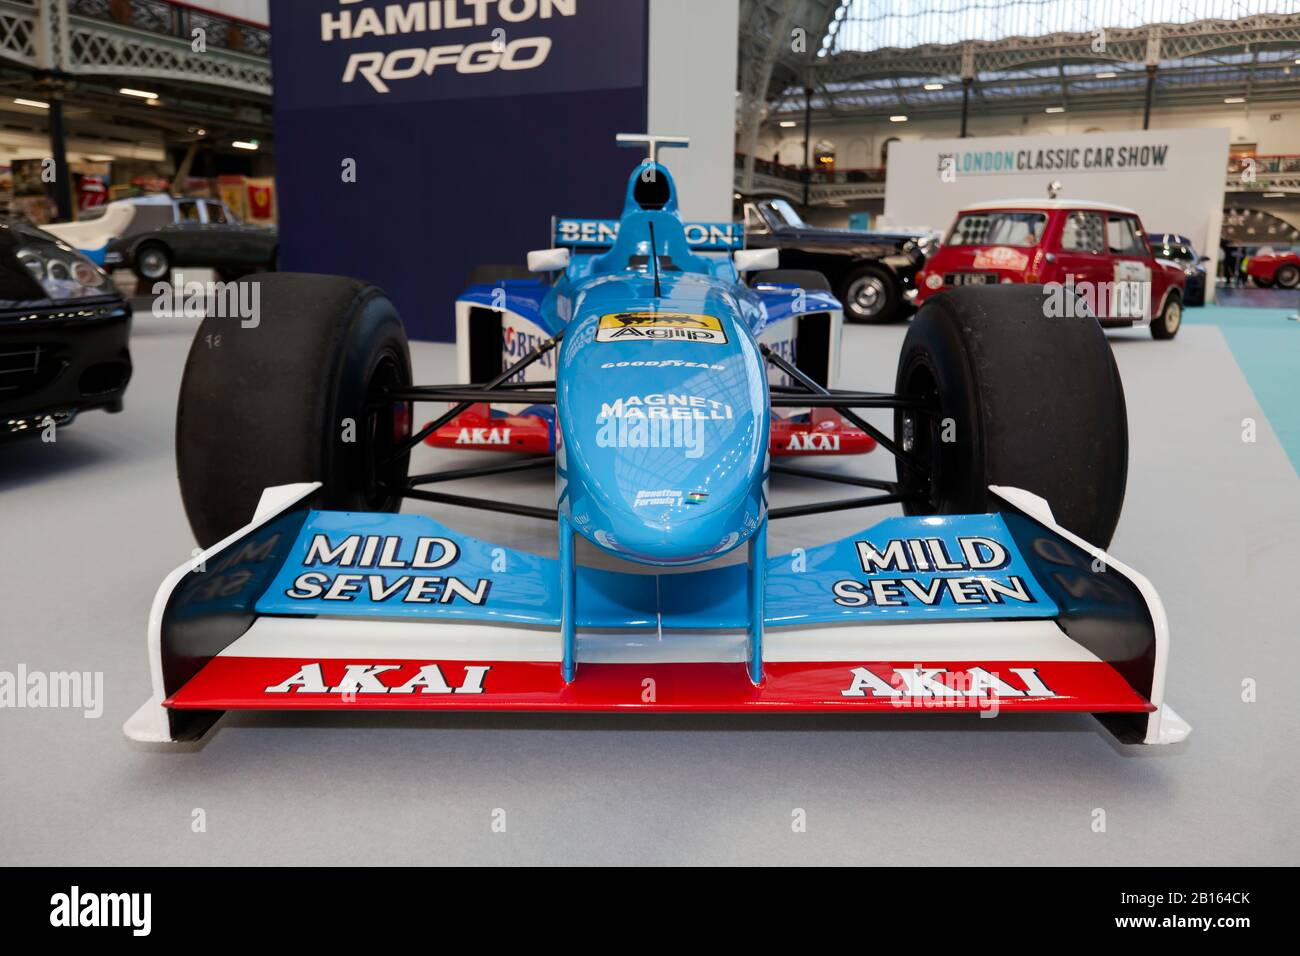 Benetton Race Car High Resolution Stock Photography and Images - Alamy